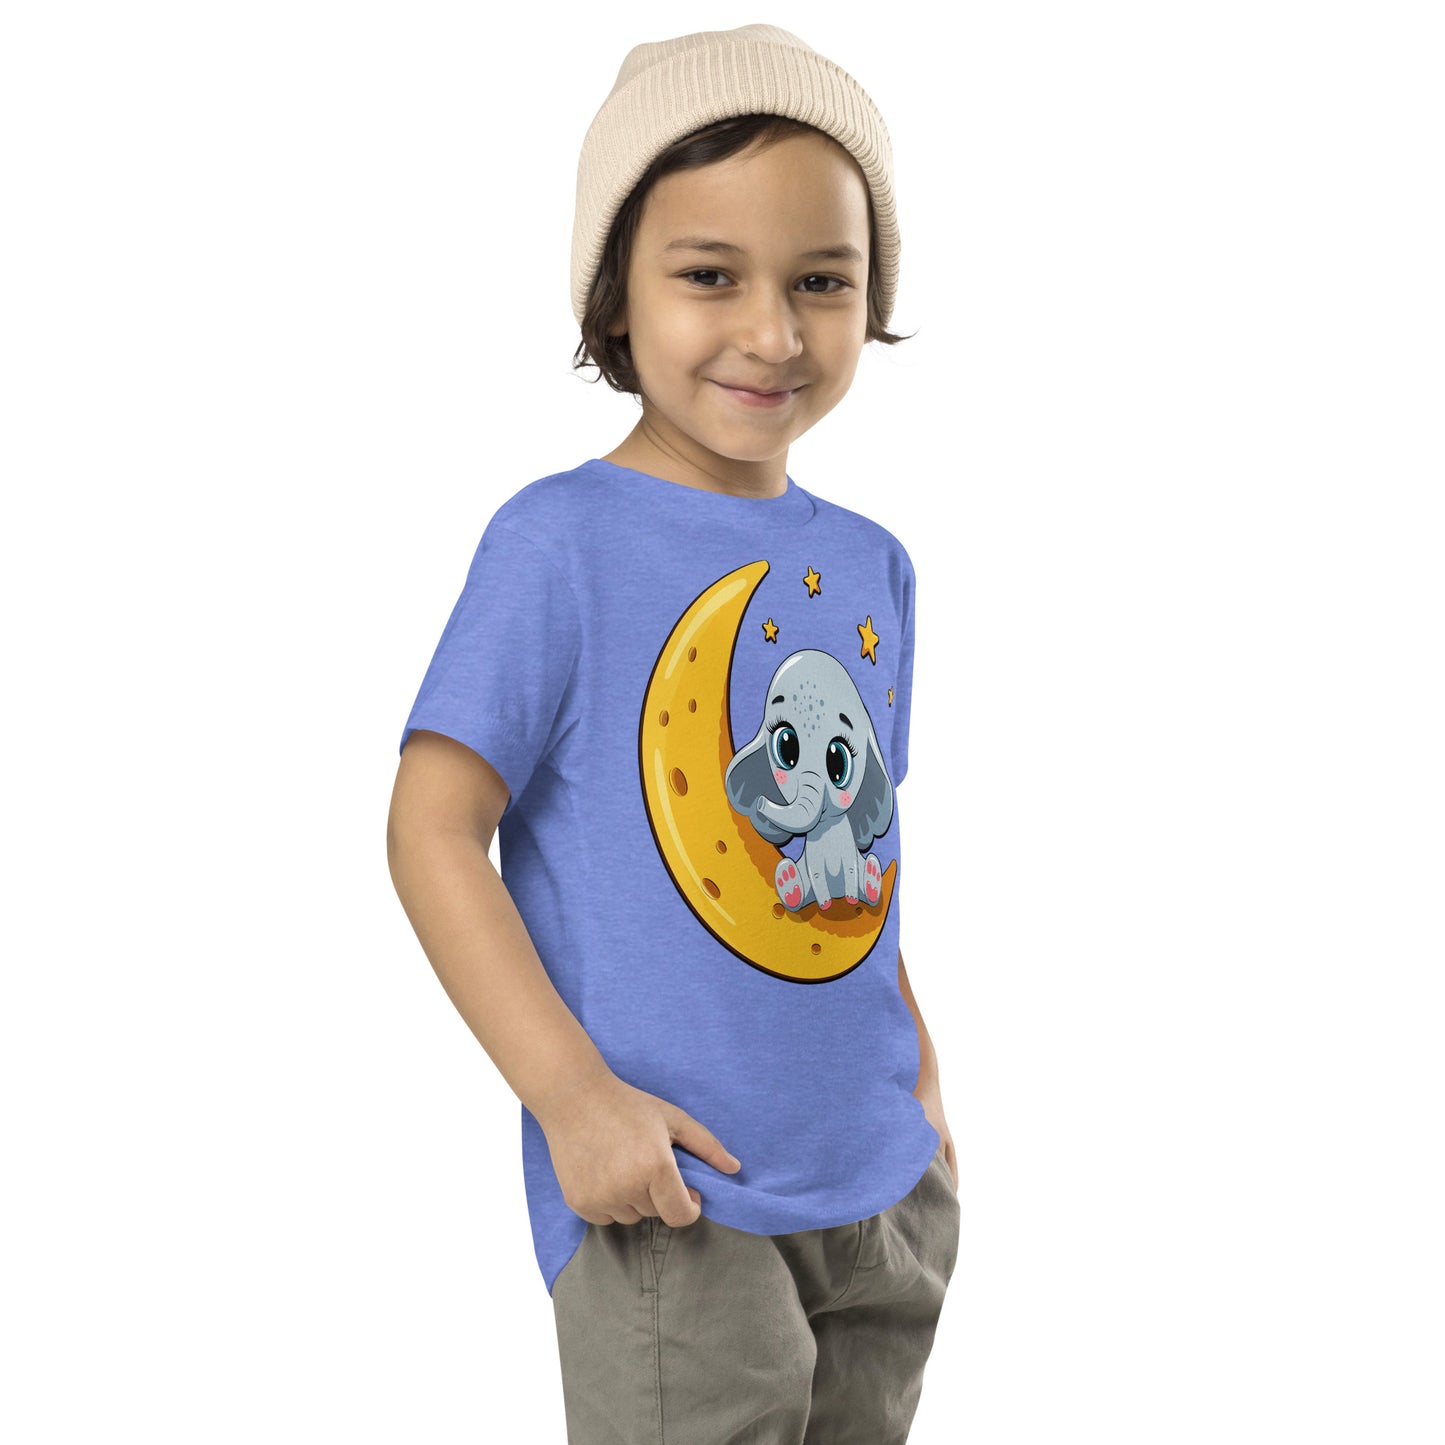 Cute Baby Elephant Sitting on the Moon T-shirt, No. 0085